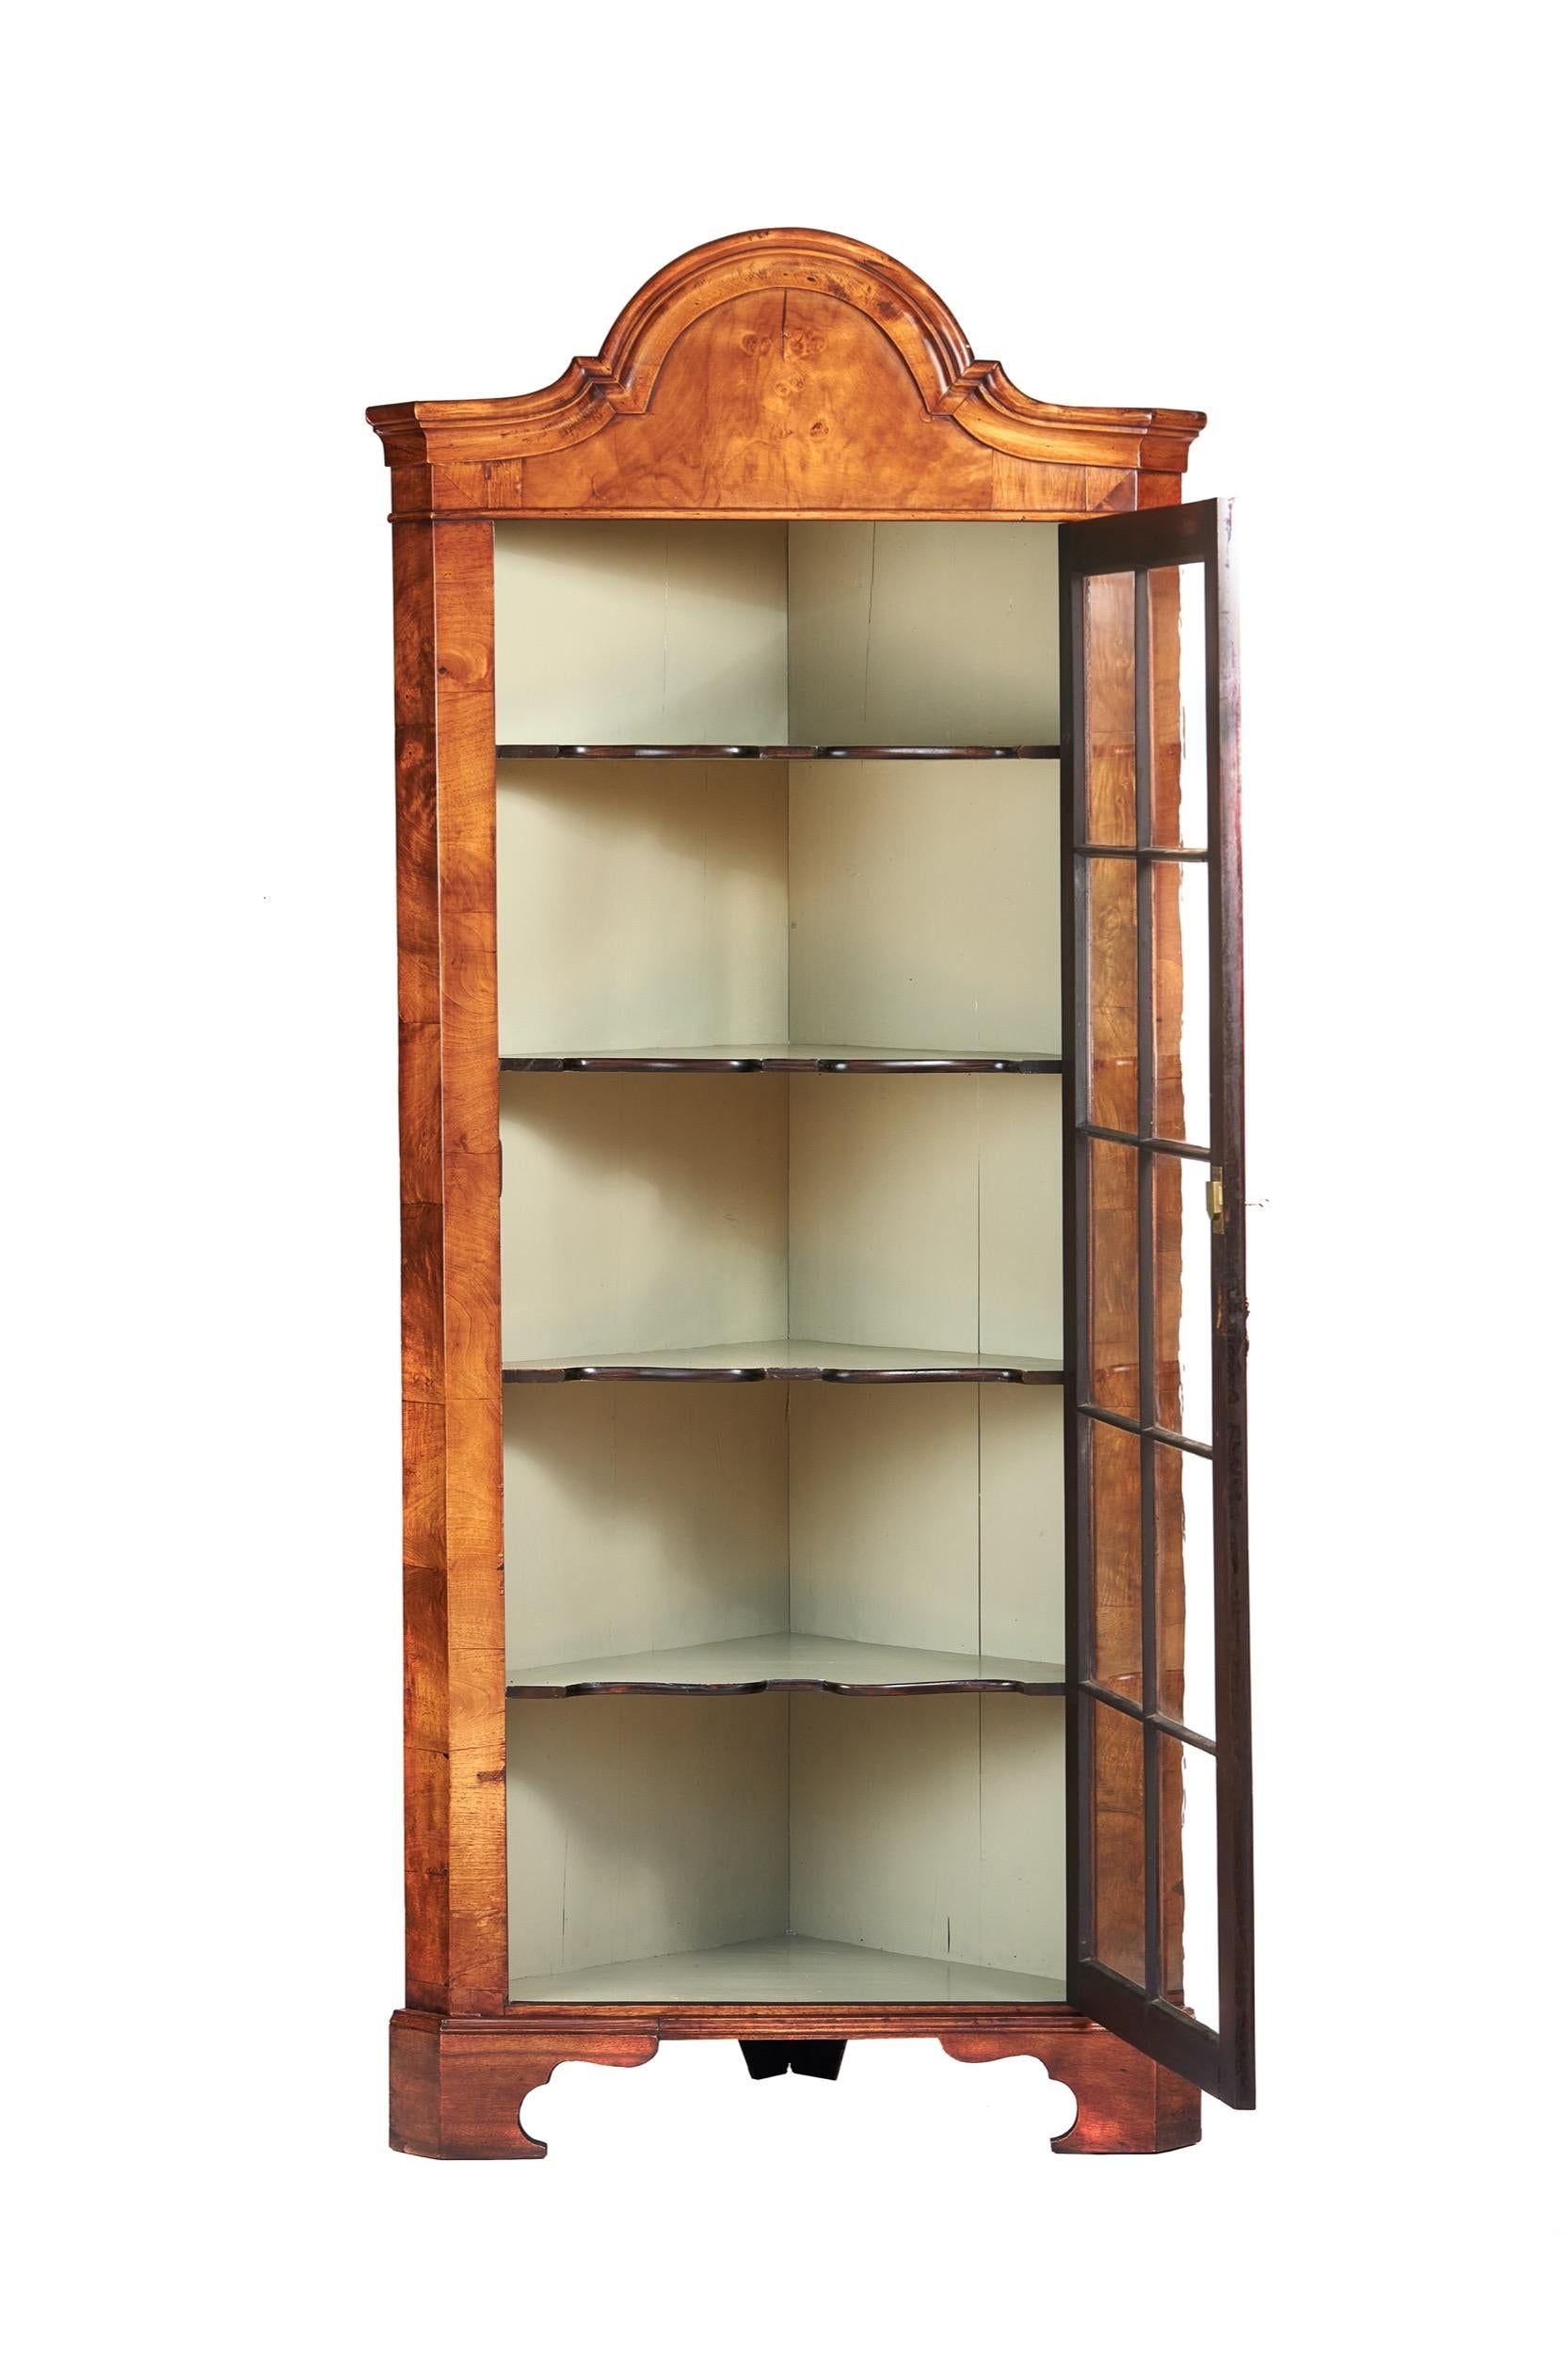 Walnut Queen Anne Revival floor standing Corner cabinet circa 1920s
Arch Shaped moulding on top,
Single Astragal Glazed door with Walnut Mould Bars,
Brass drop handle, with working lock & key, 
Open to Reveal 4 Fixed shelves, 
Painted Interior,